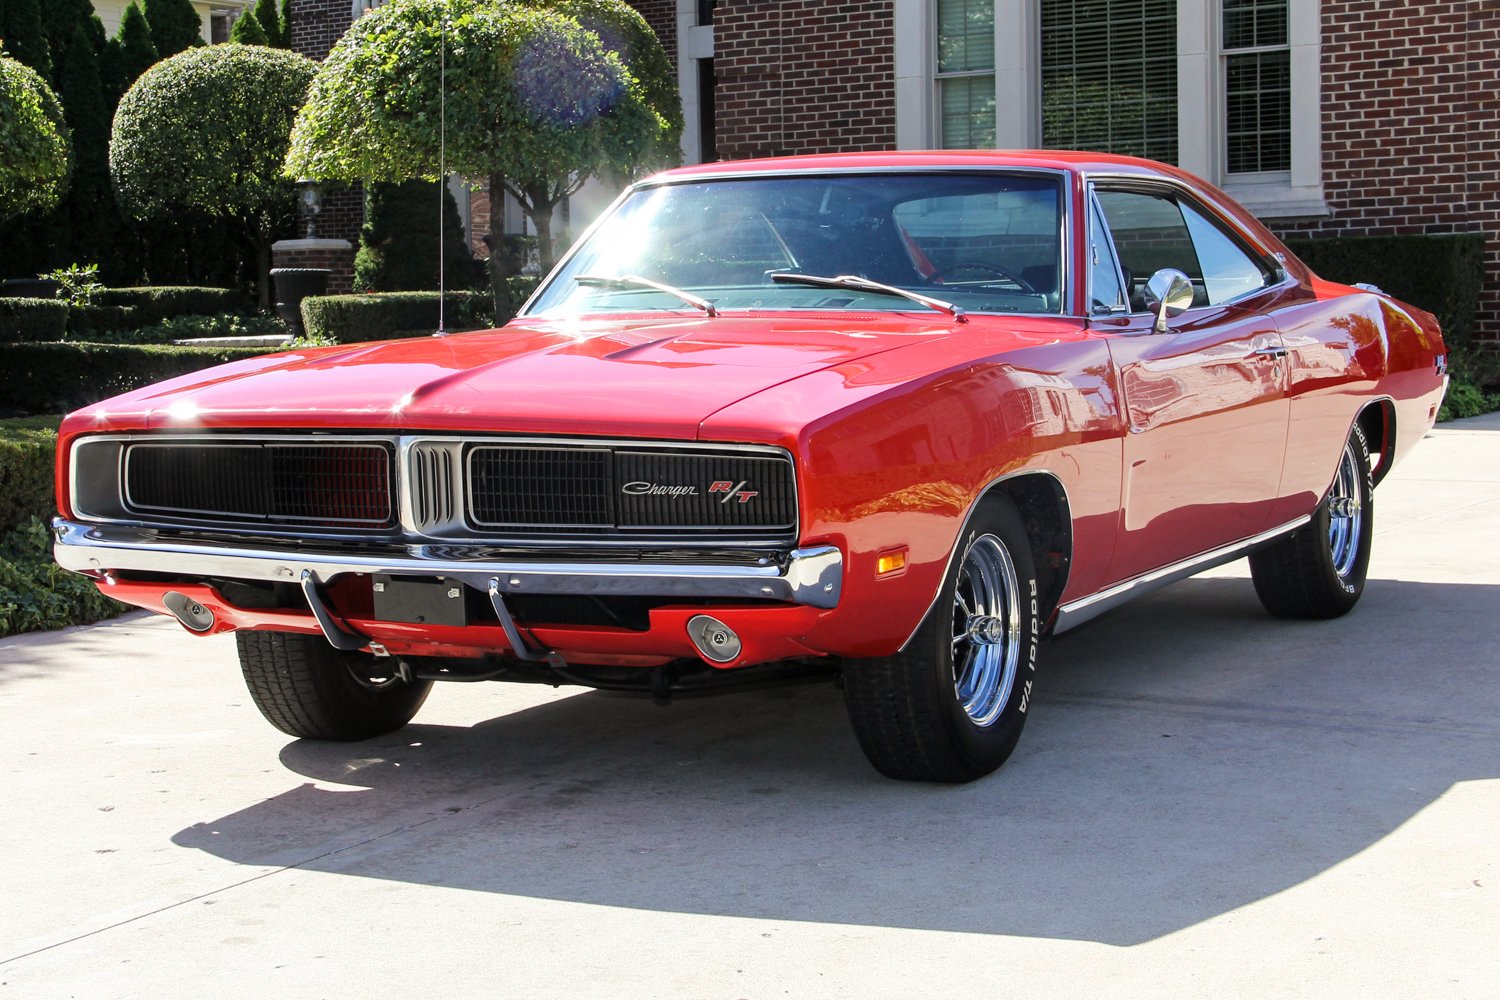 1969 Dodge Charger | Classic Cars for Sale Michigan: Muscle & Old Cars